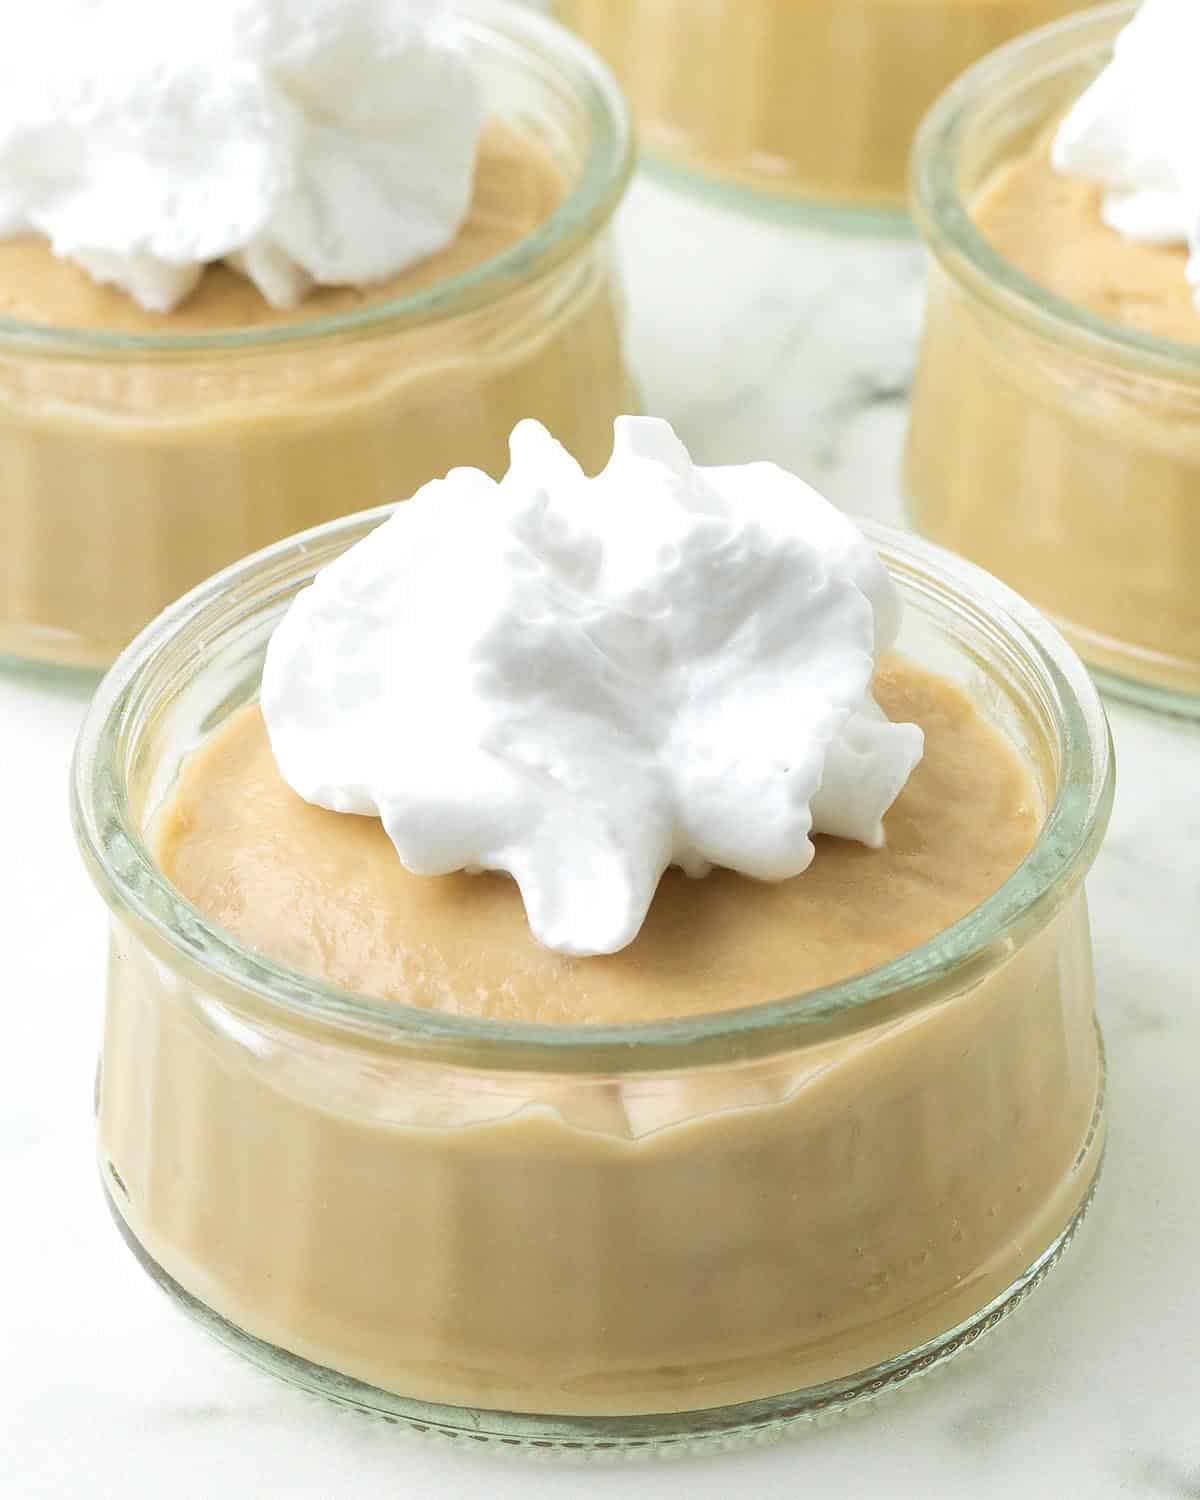 Butterscotch pudding in a glass bowl topped with whipped cream.